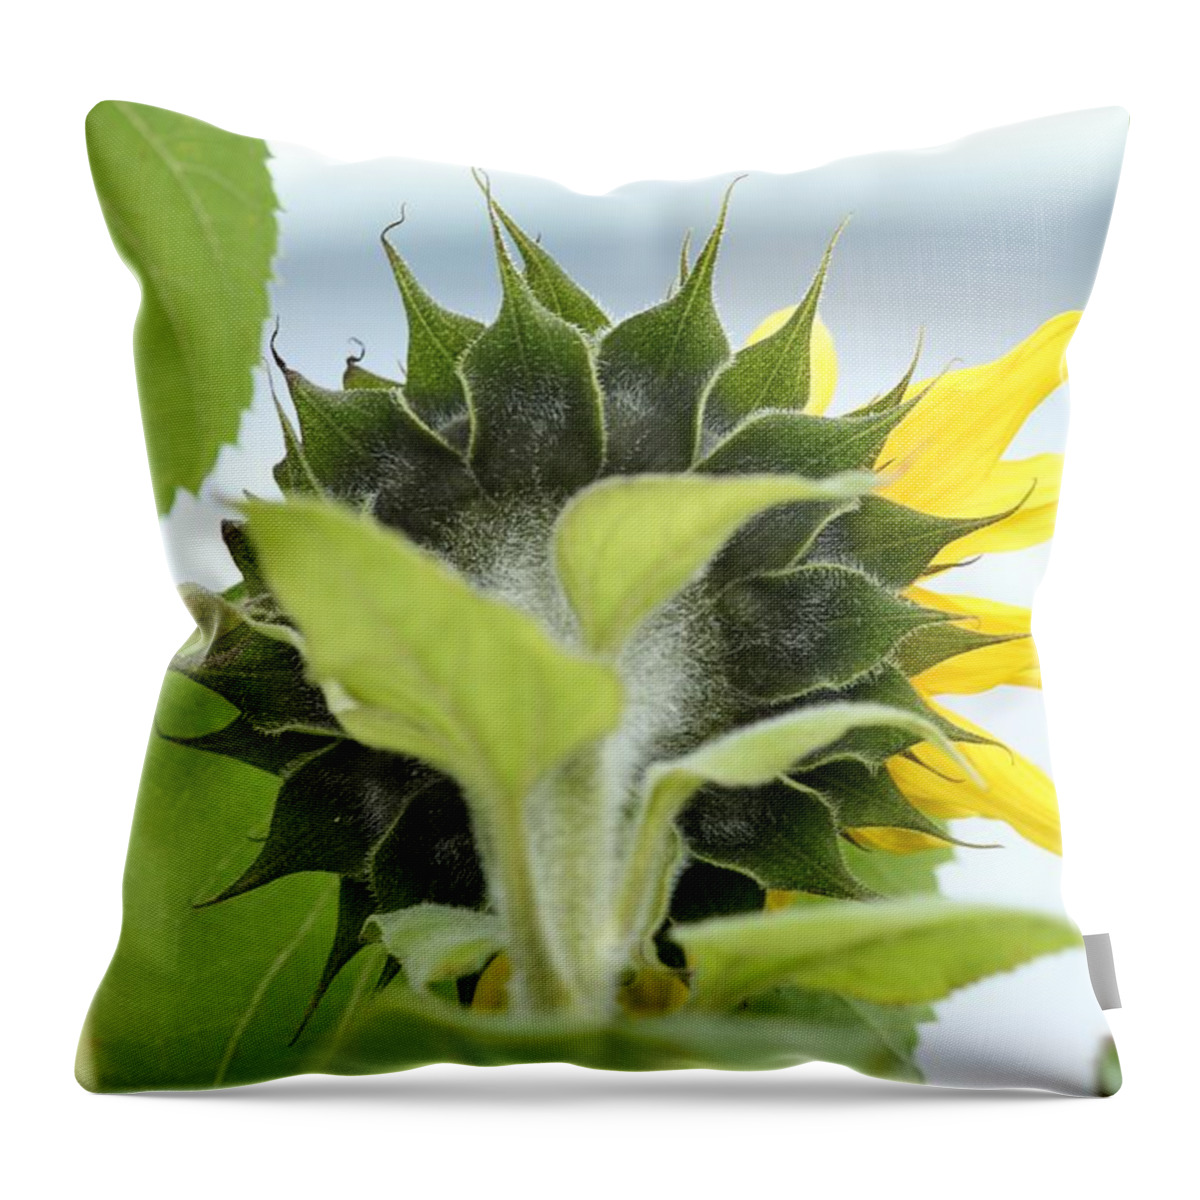 Green And Yellow Throw Pillow featuring the photograph Rear View Image by E Faithe Lester